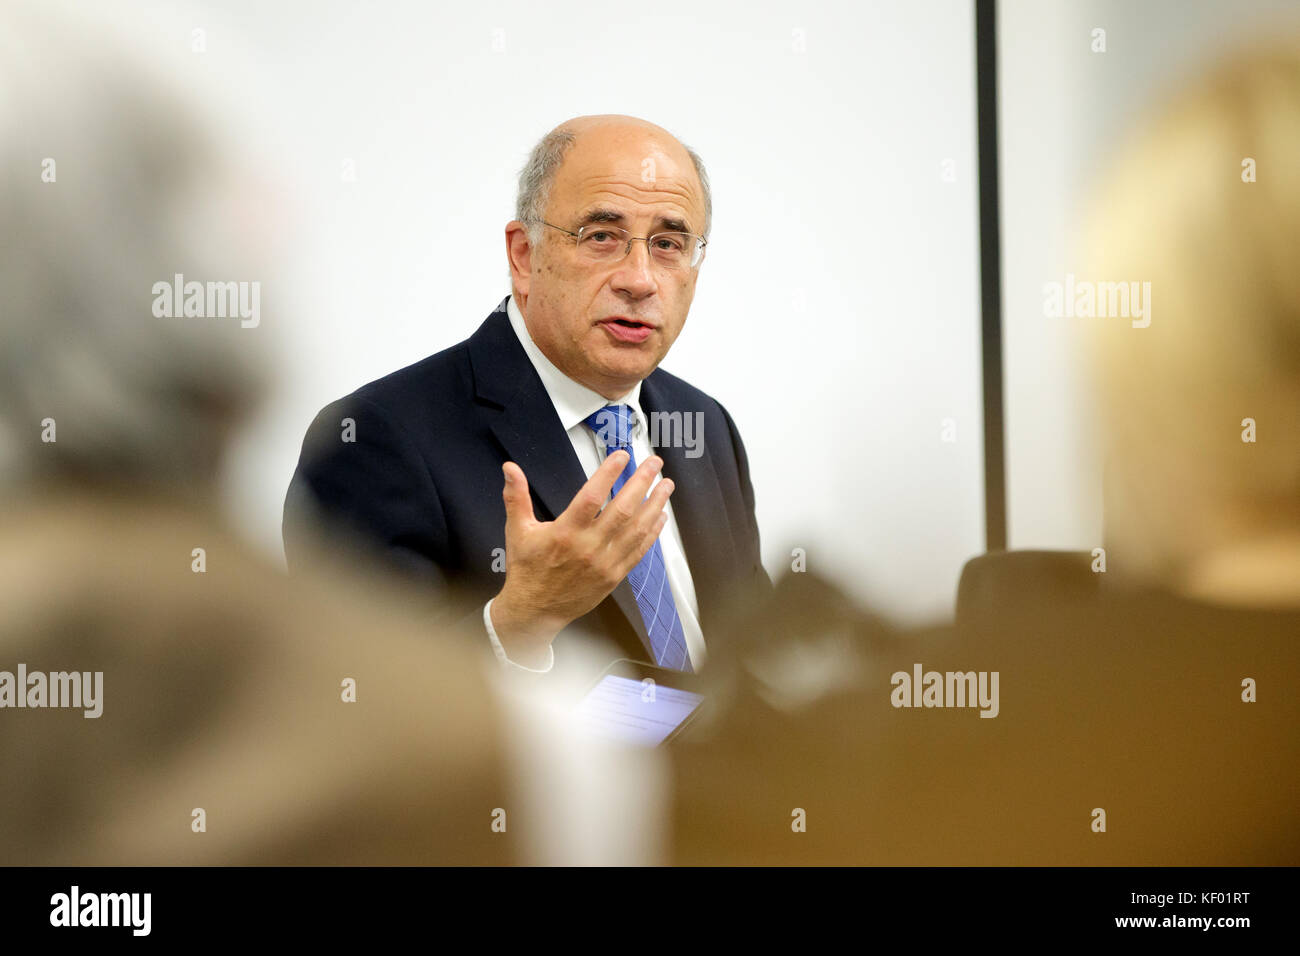 Sir Brian Leveson PC - An English judge who chaired the public inquiry into the culture, practices and ethics of the British press Stock Photo